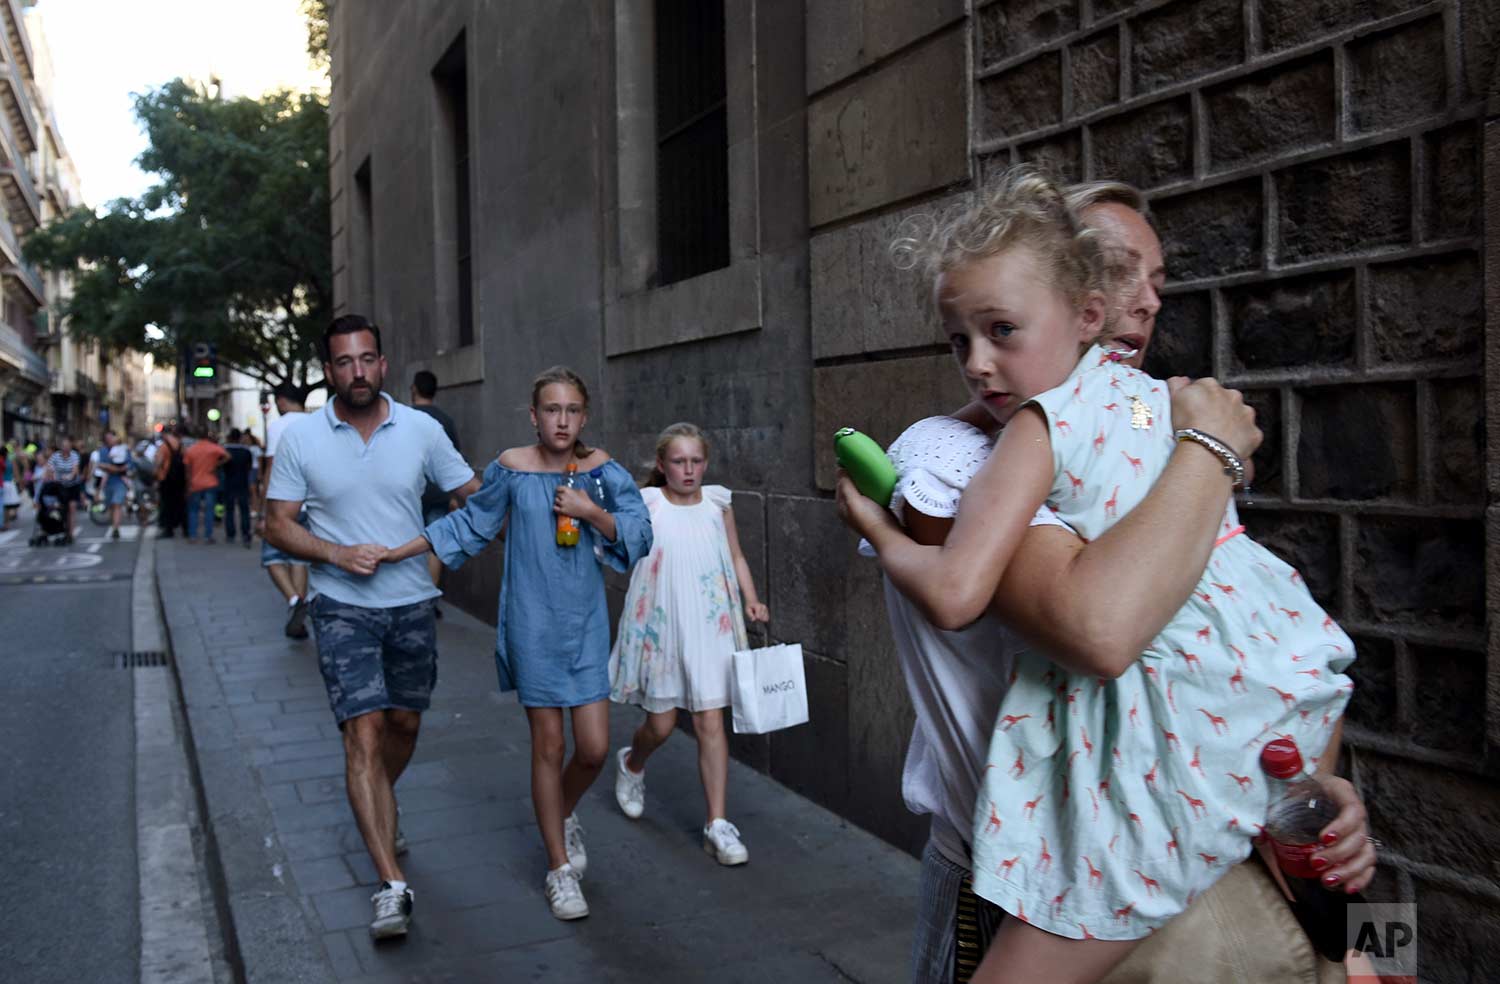  People flee the scene in Barcelona, Spain, on Aug. 17, 2017, after a van jumped the sidewalk in the historic Las Ramblas district, crashing into a summer crowd of residents and tourists and injuring several people. (AP Photo/Giannis Papanikos) 